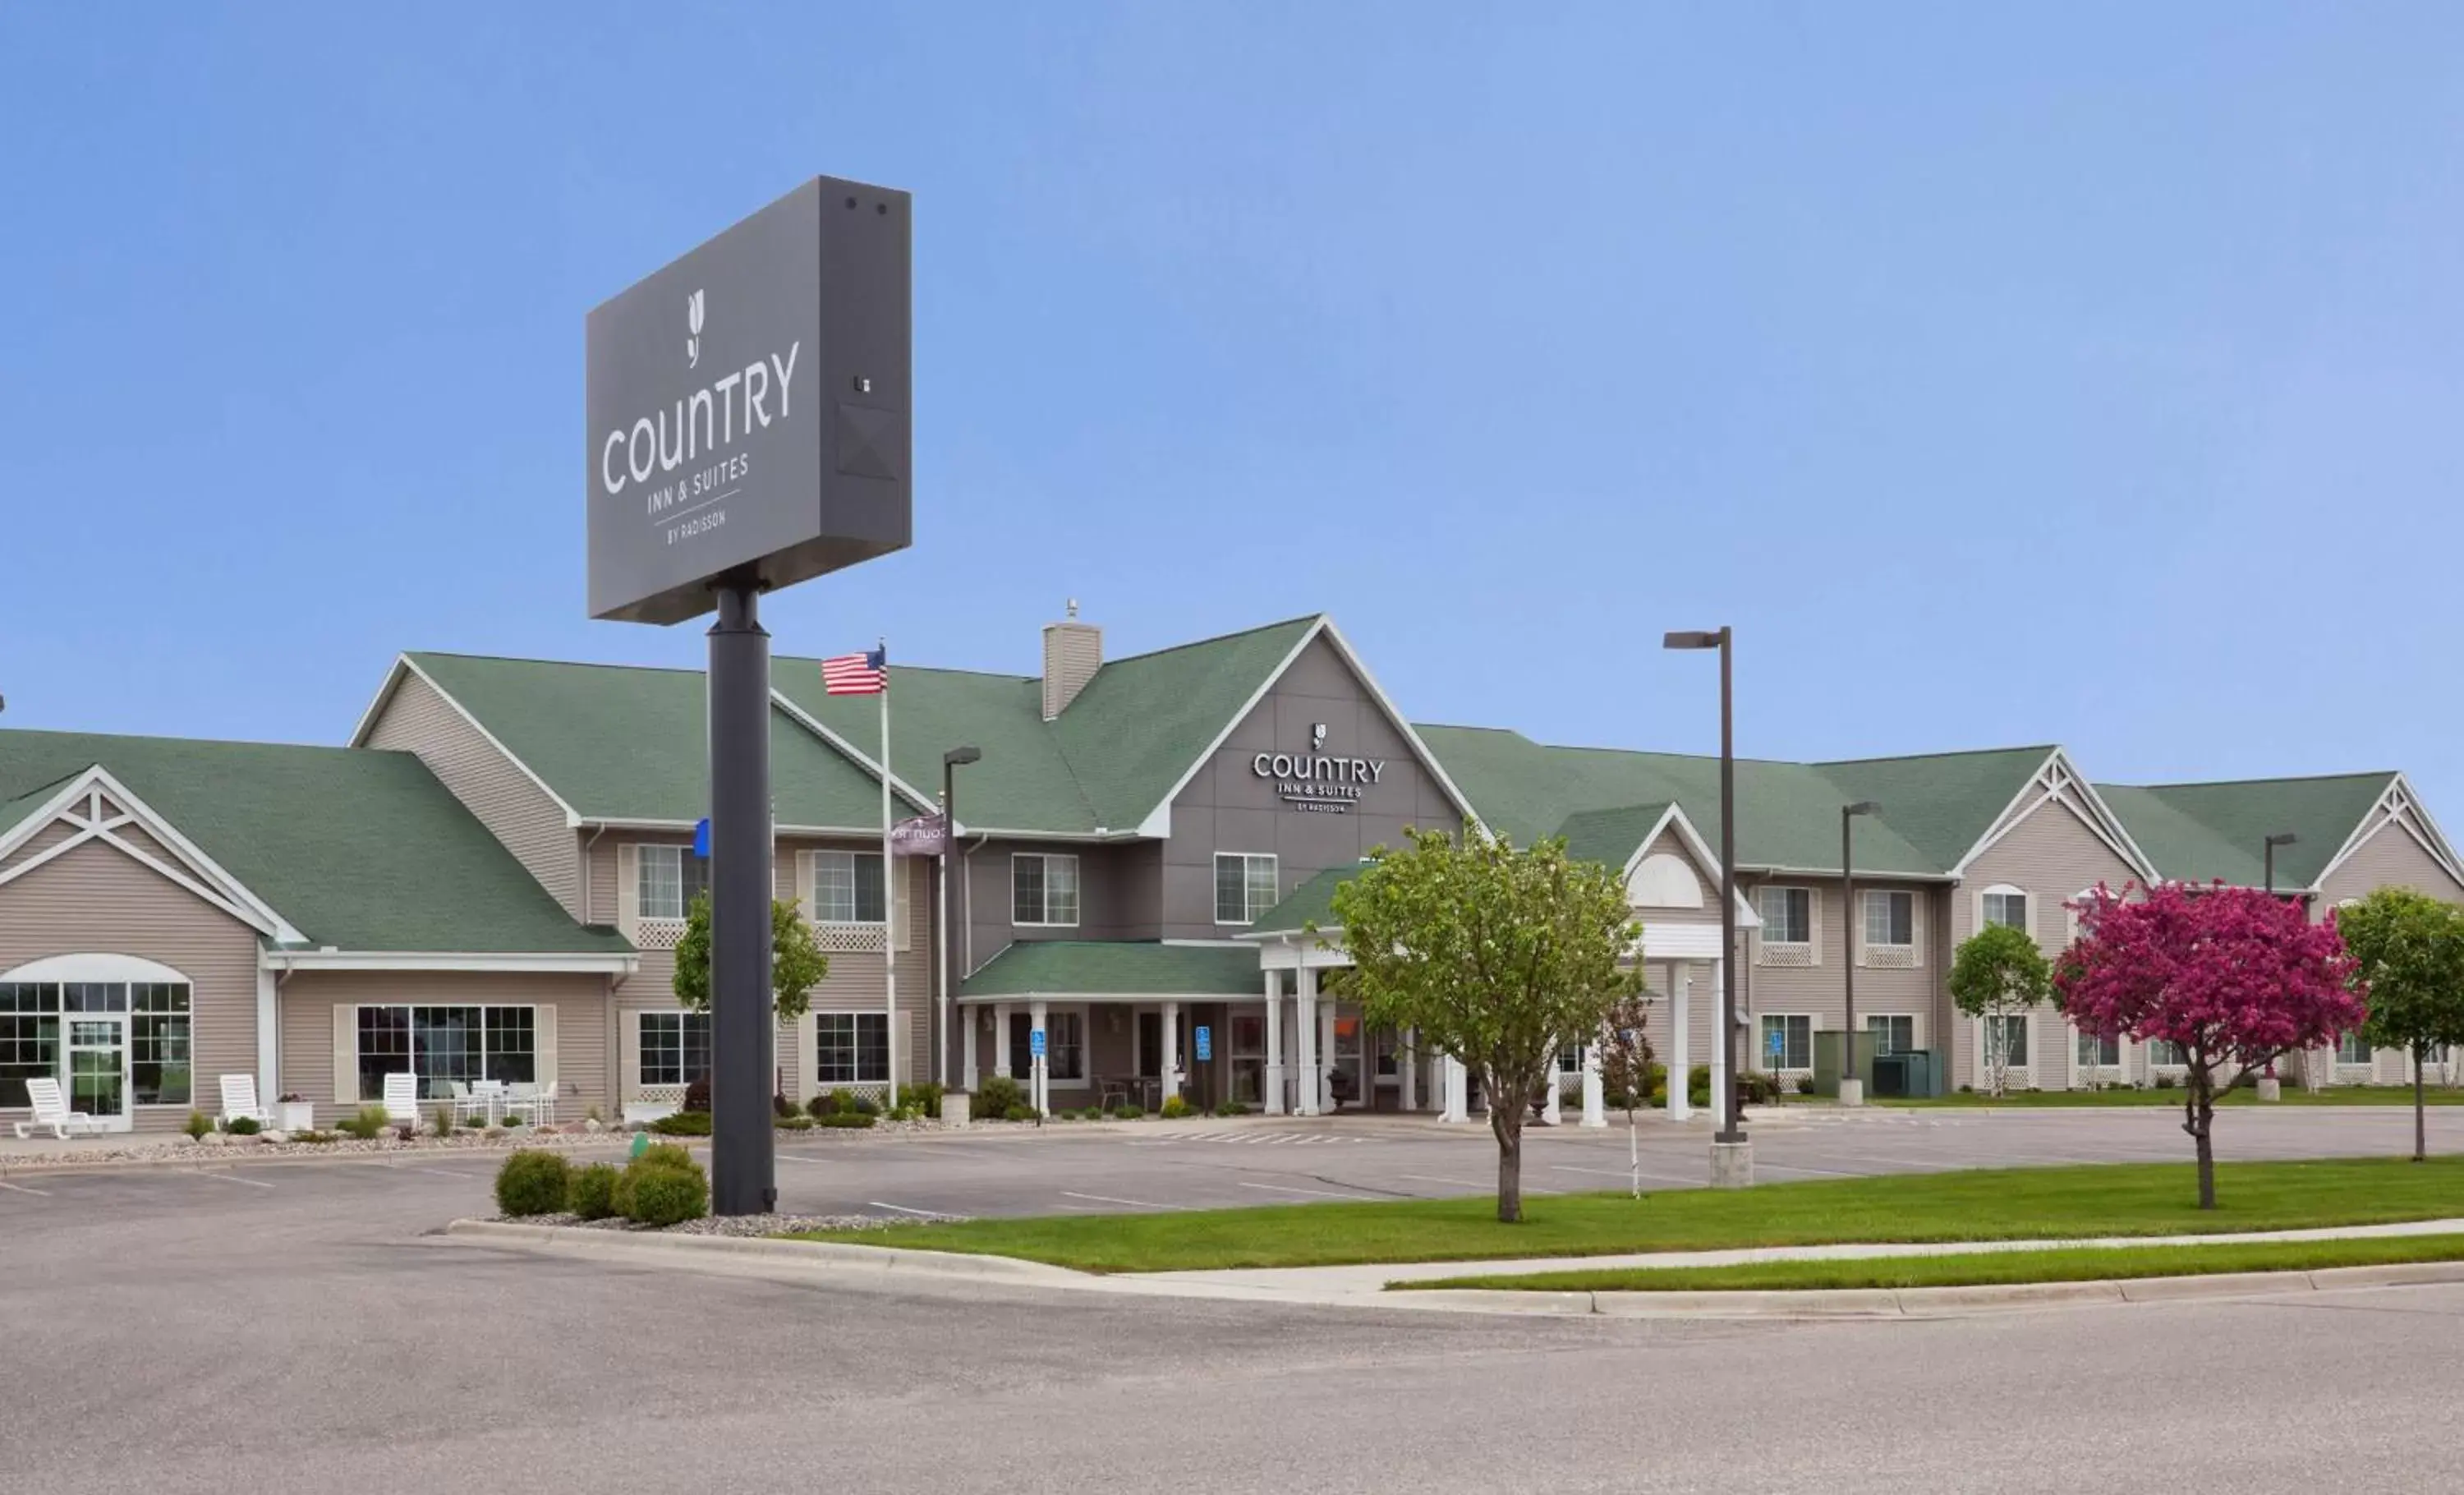 Property Building in Country Inn & Suites by Radisson, Willmar, MN